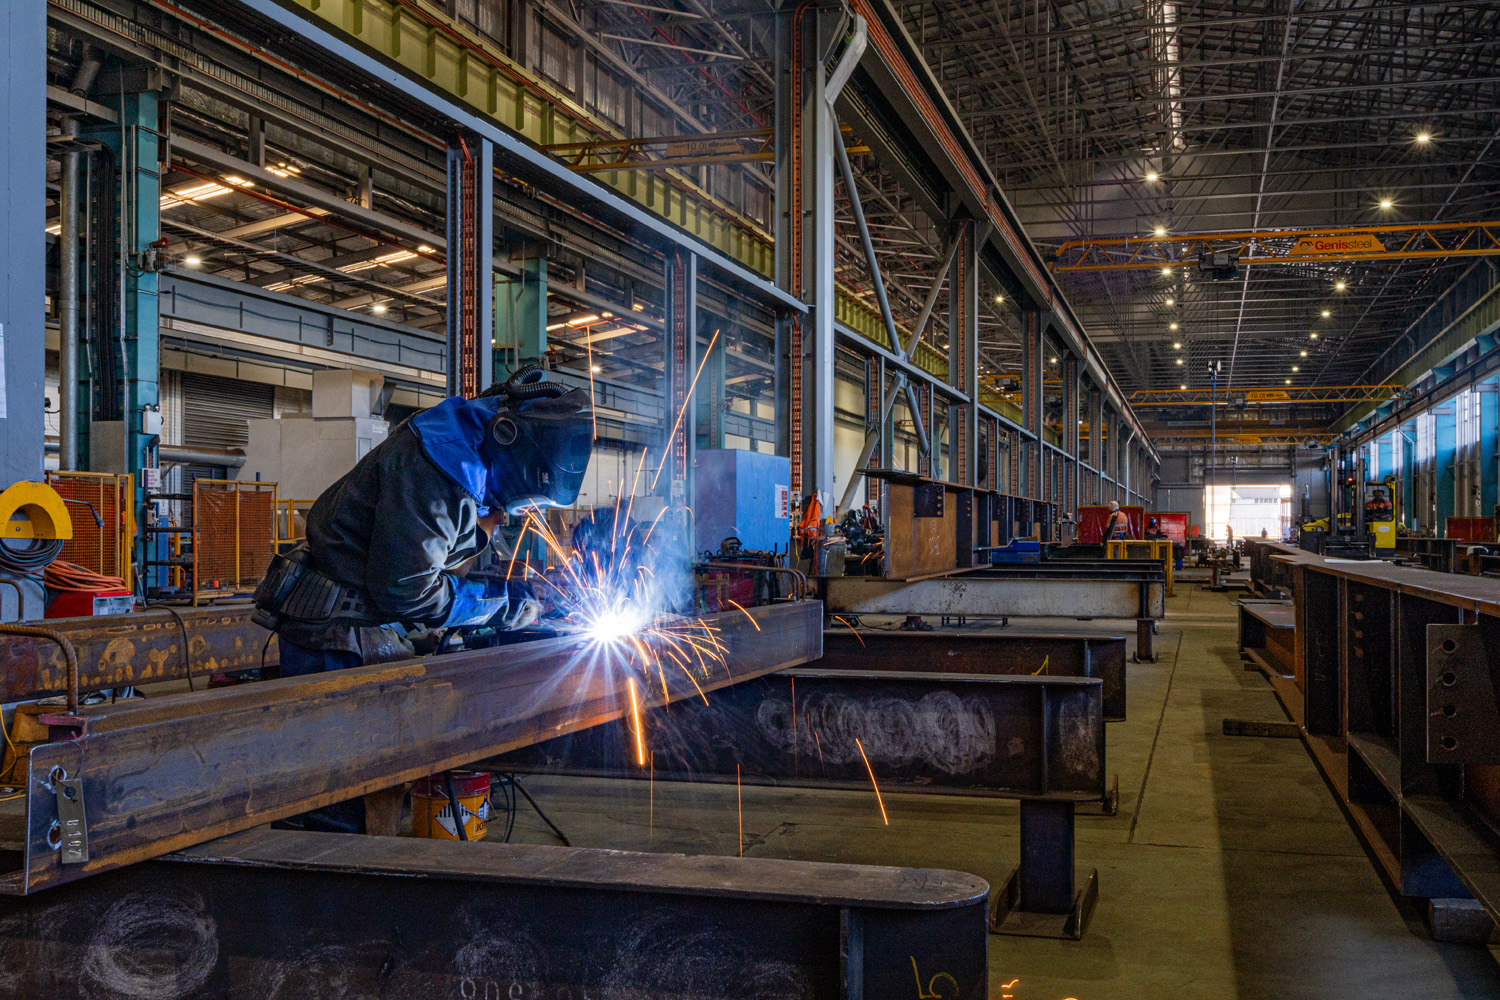 Image of someone in a welding suit welding a steel beam, there is sparks flying off the work area.